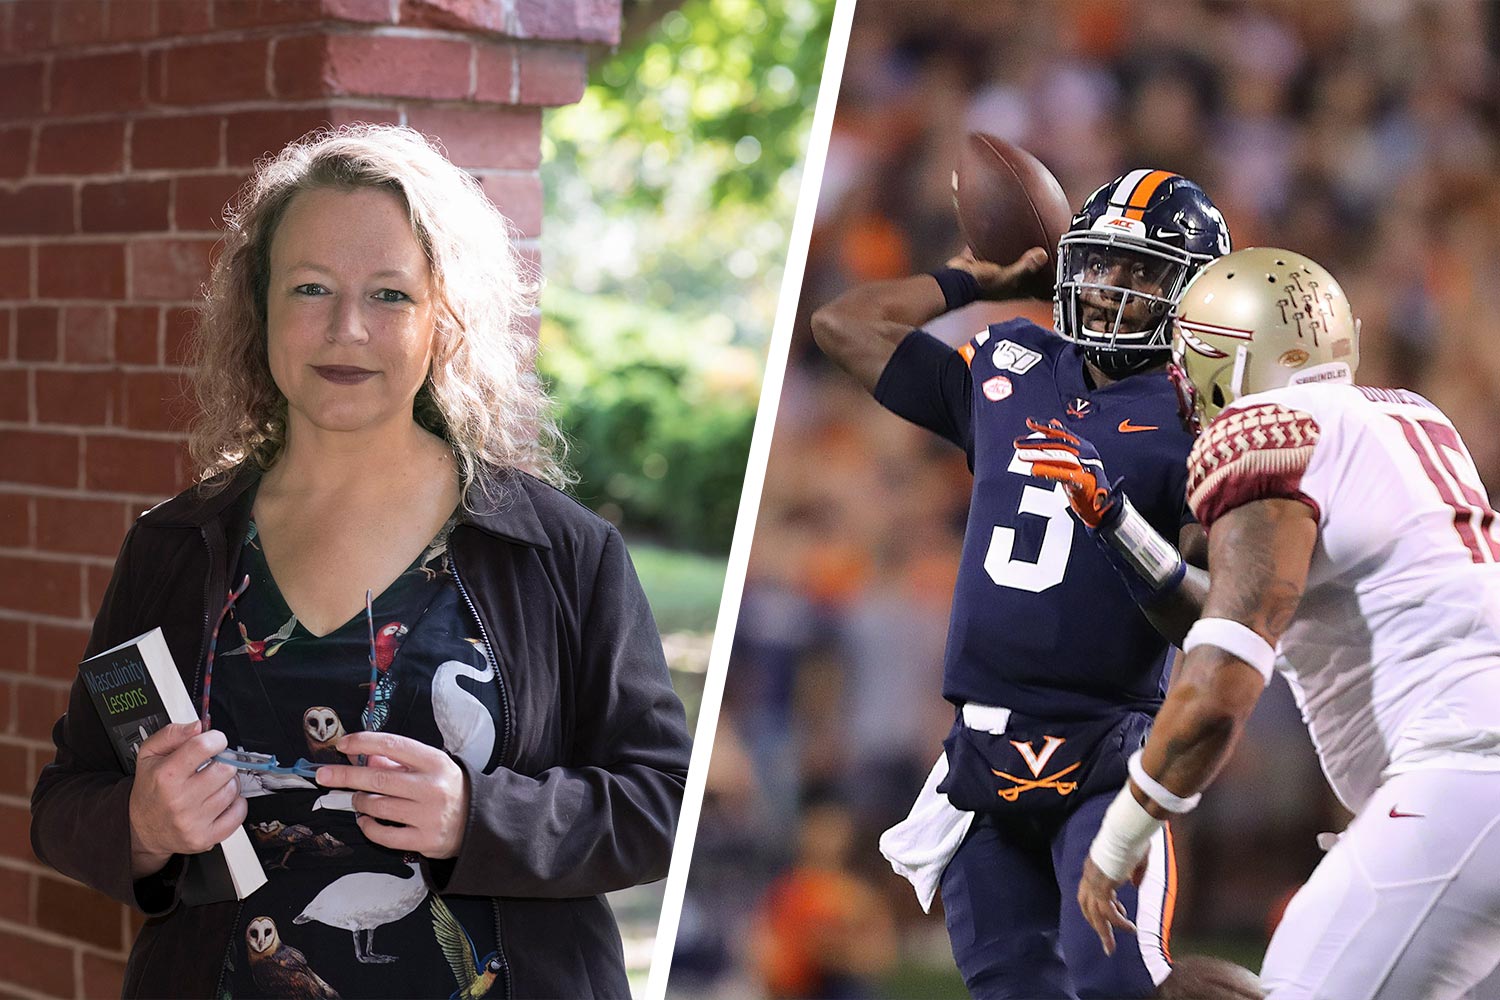 Left: Headshot of Lisa Speidel  Rigth: Bryce Perkins throwing a football down the field during a game